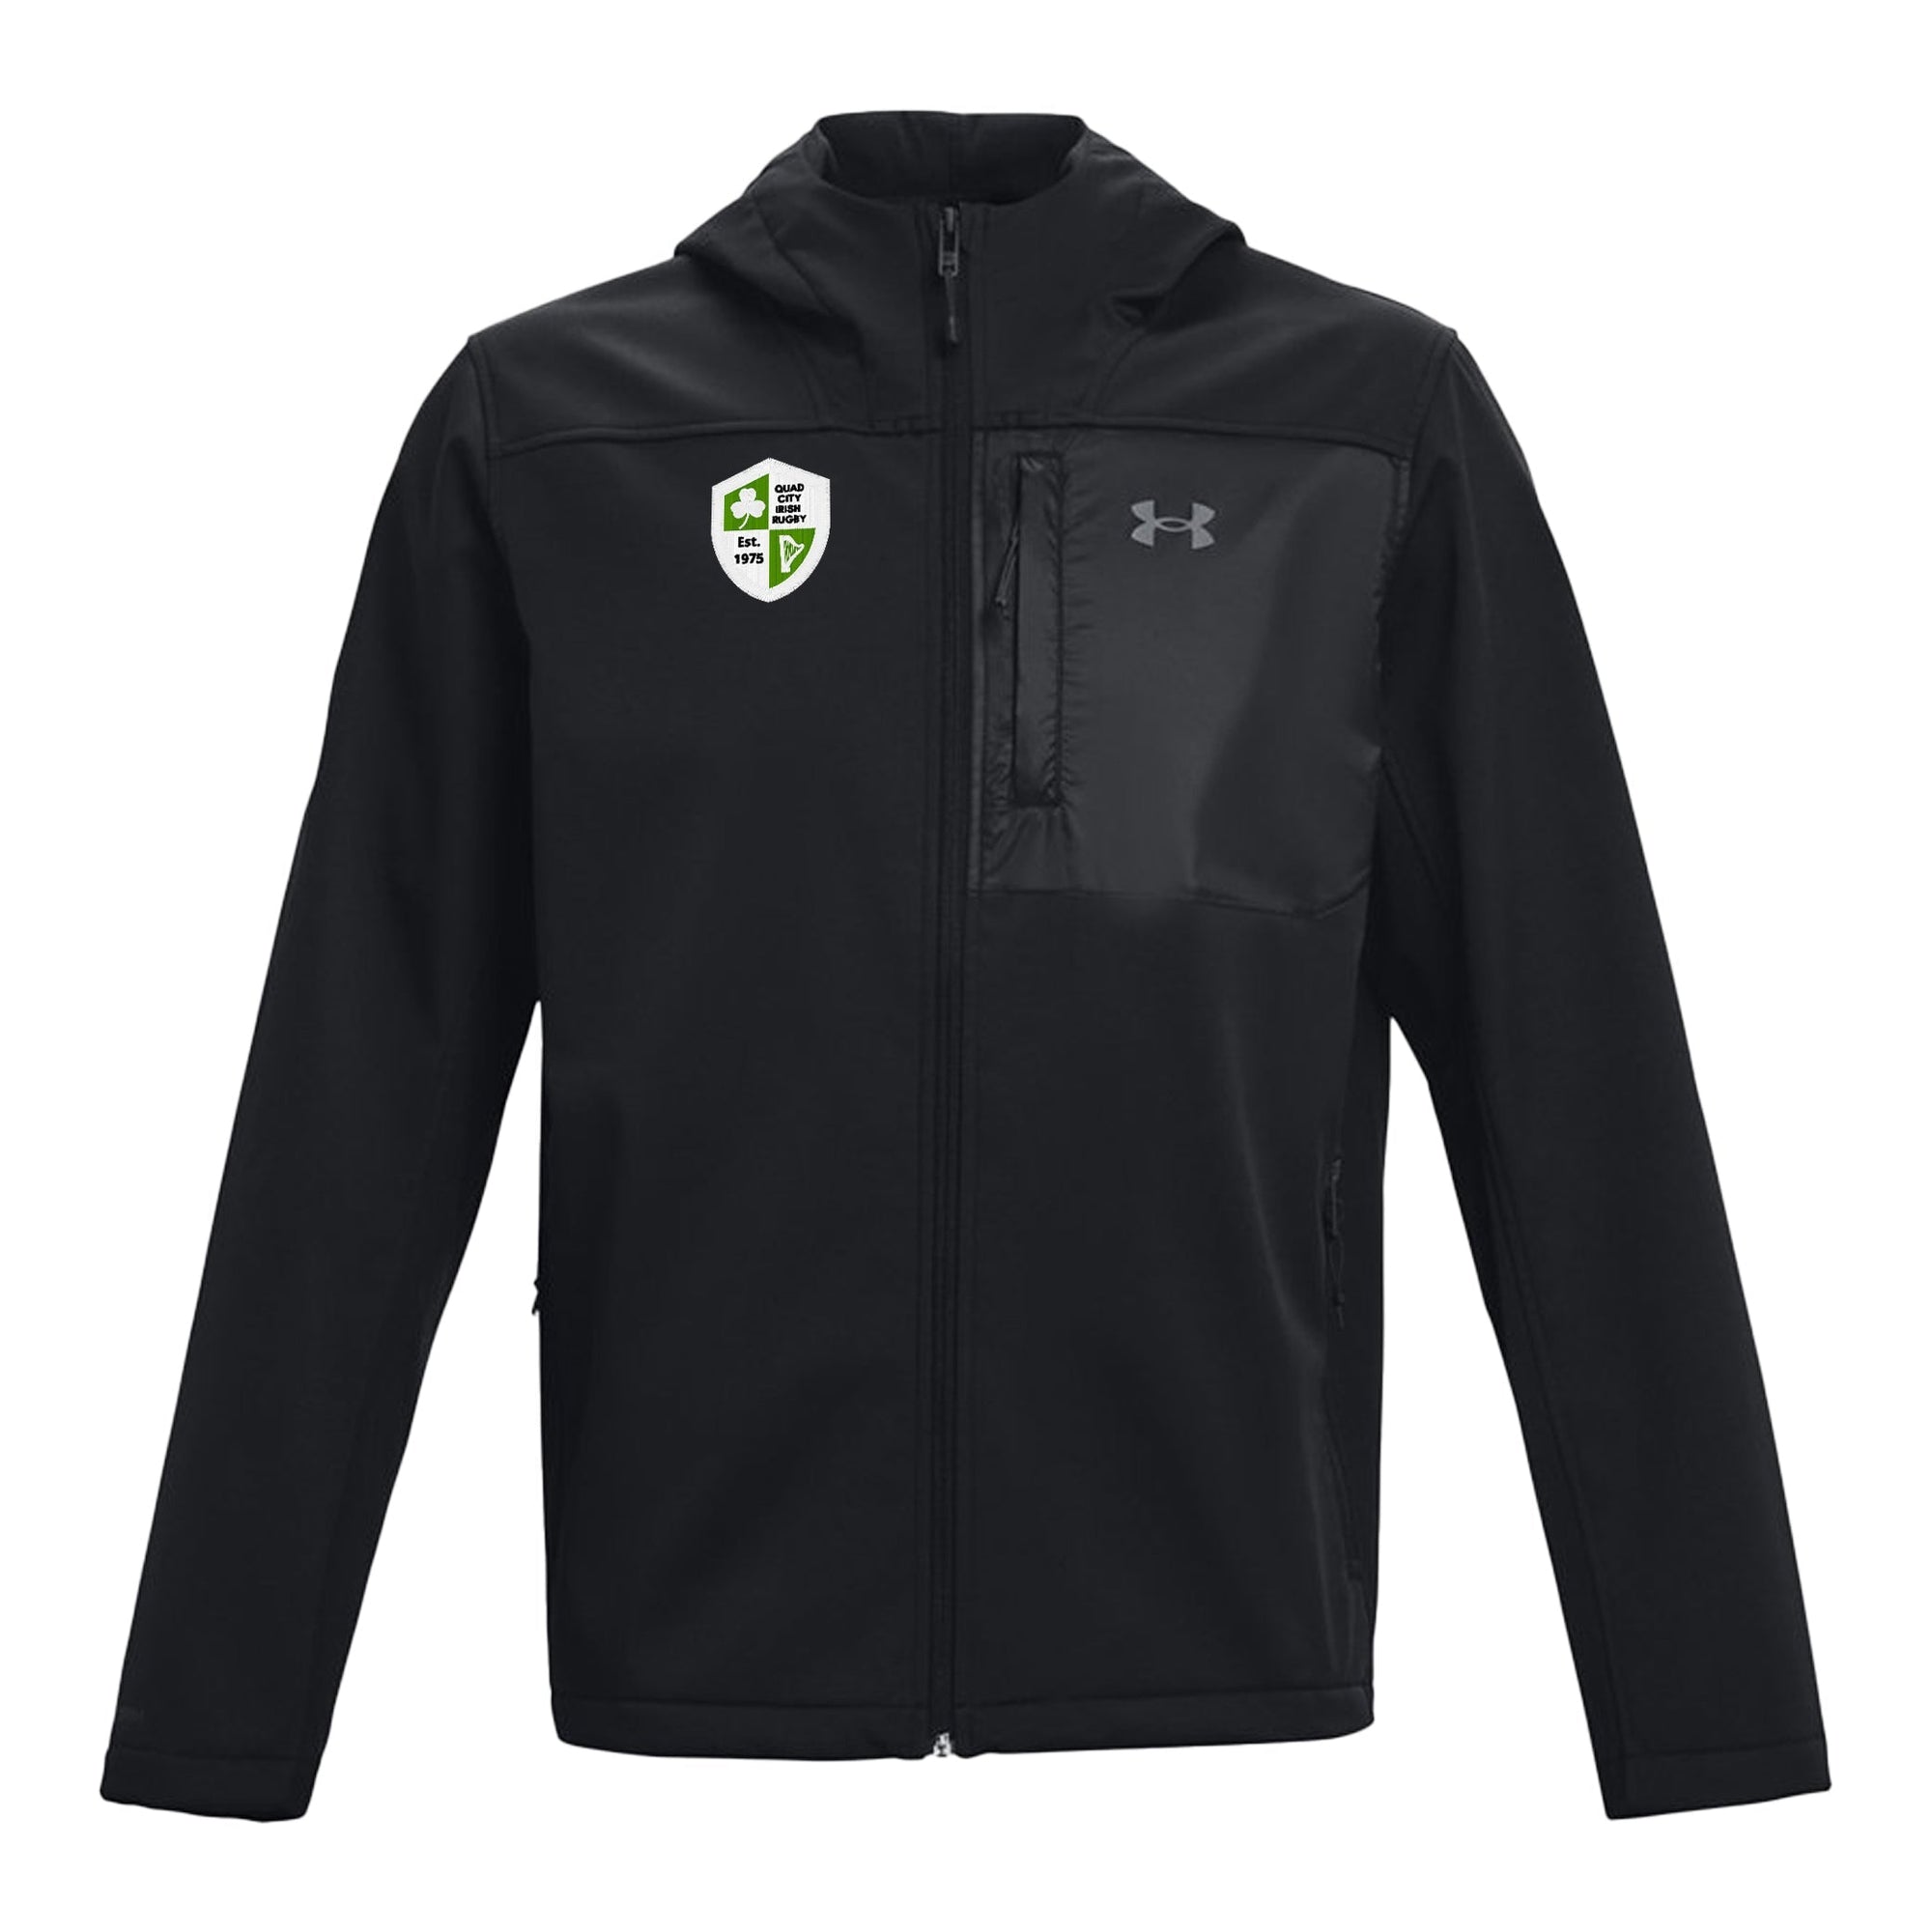 Rugby Imports Quad City Irish Coldgear Hooded Infrared Jacket